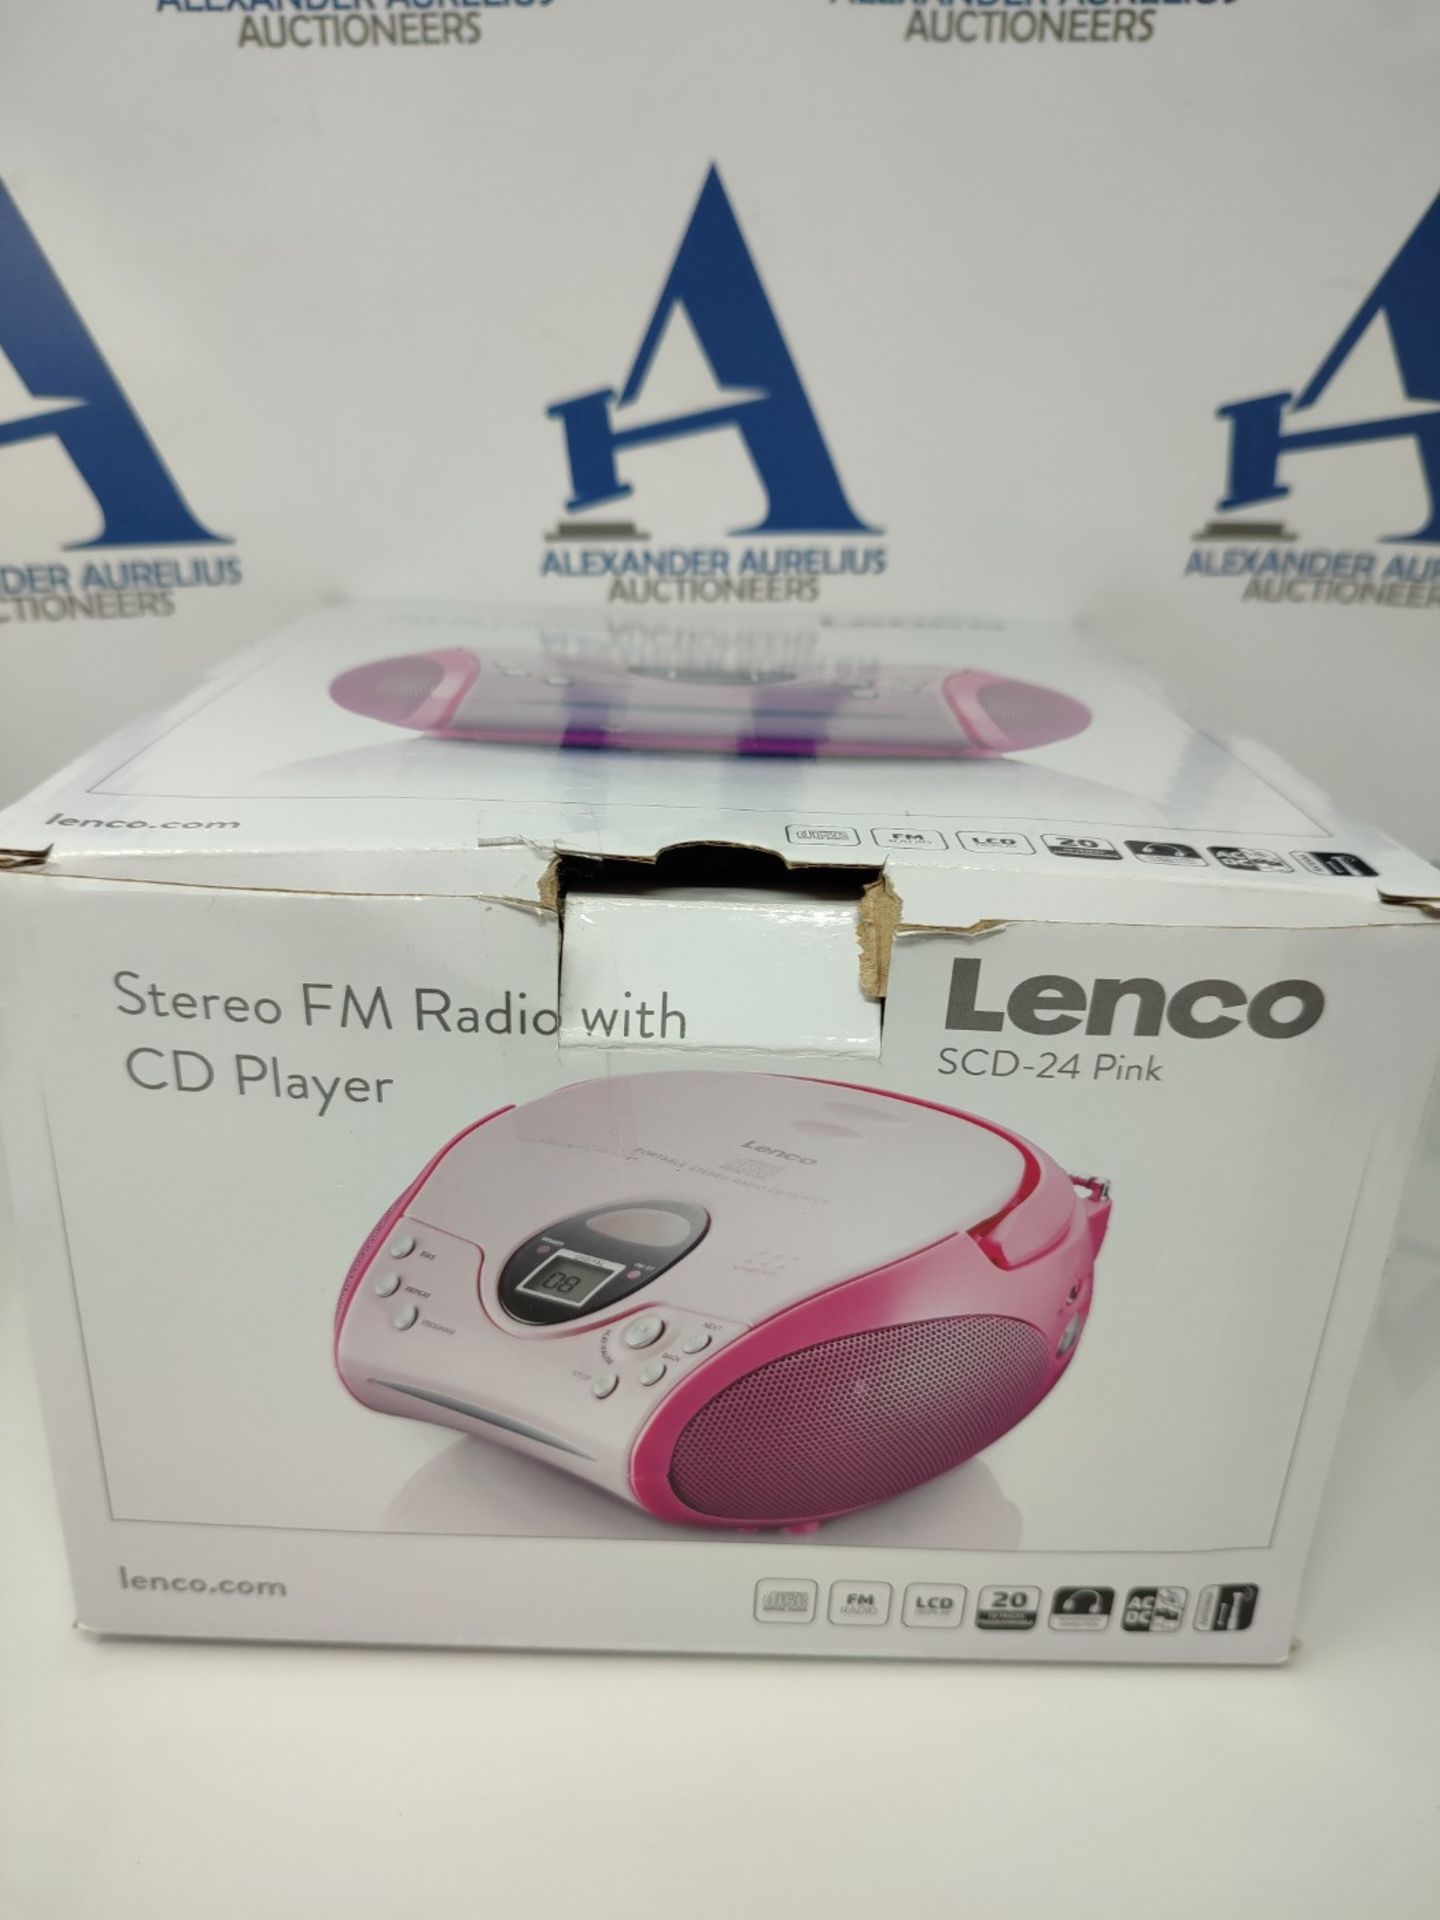 Lenco SCD-24 stereo FM radio with CD player and telescopic antenna pink - Image 2 of 3